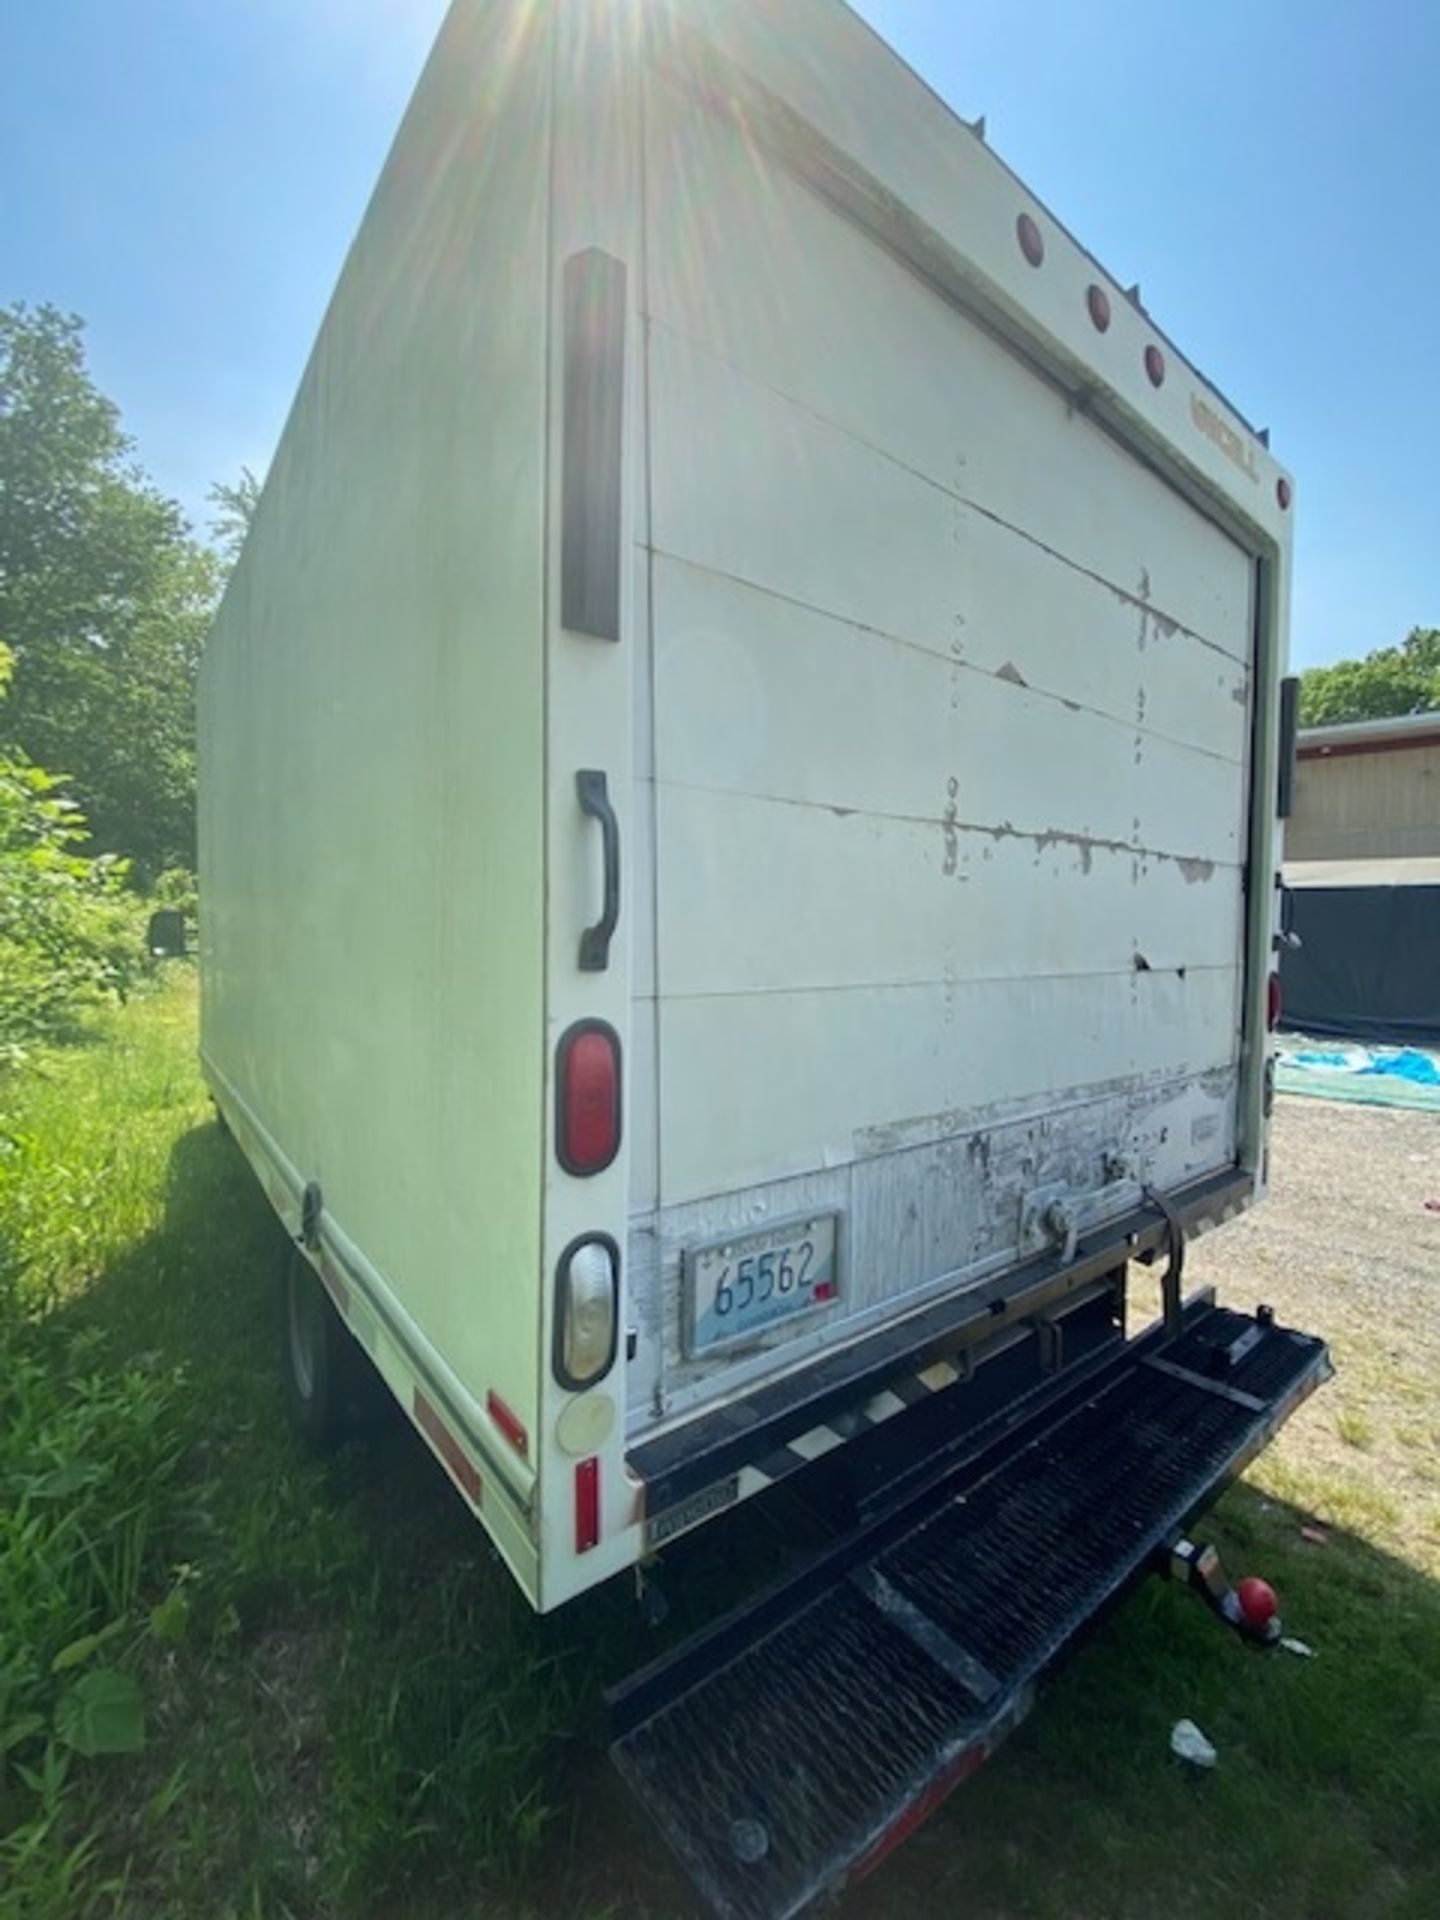 2004 Ford E-350 Super Duty 16 ft. Box Truck, VIN #: 1FDWE35L04HA05850, with 167,651 Miles, with 2- - Image 11 of 17